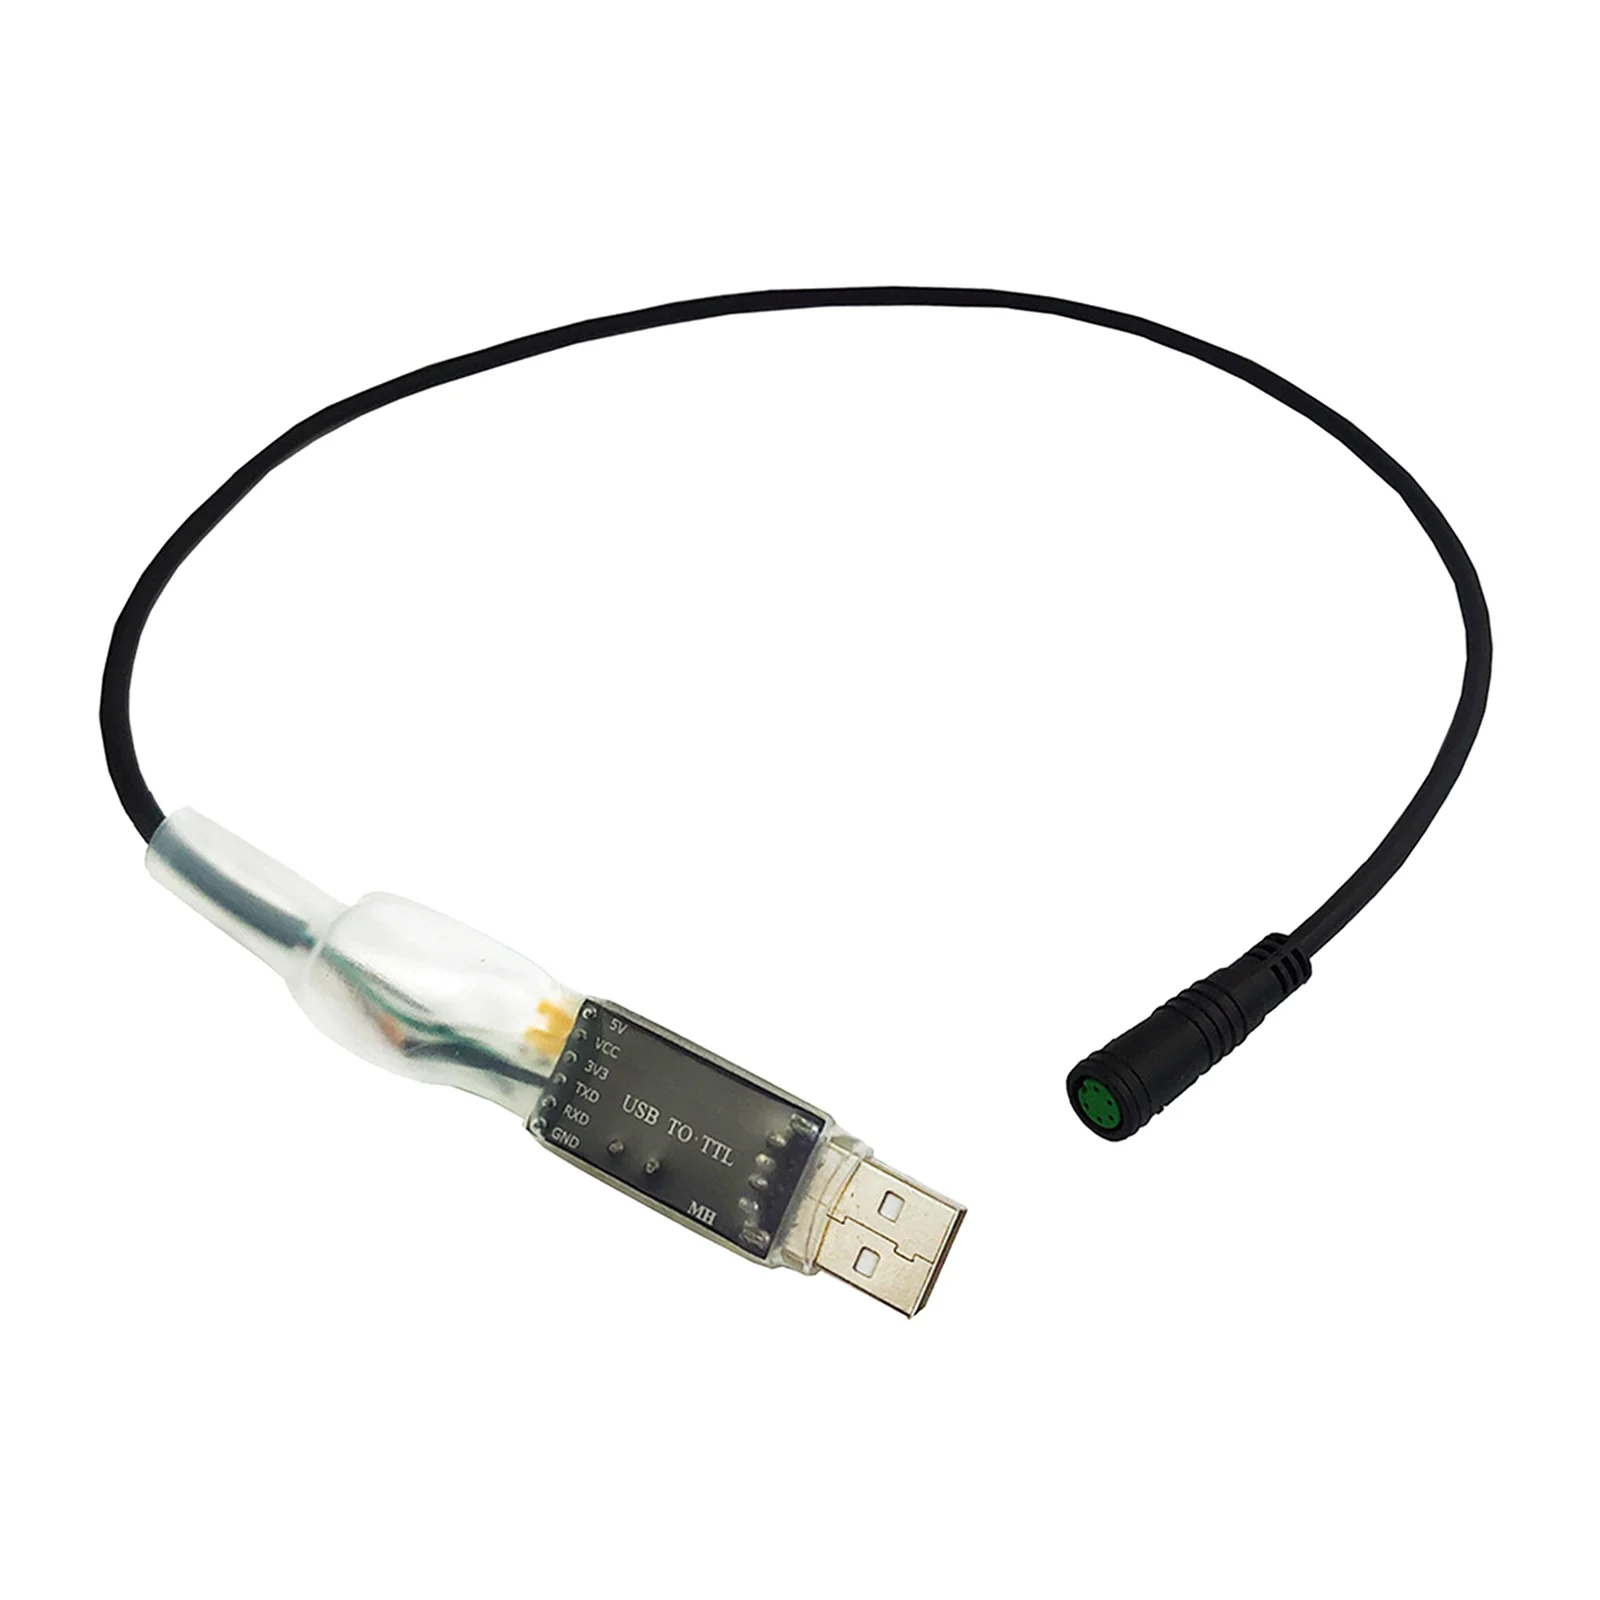 Portable Program Cable Cord Lead for BBS01 BBS02 BBHD Kit Electric Cycling Motor Stable Durable Accessories 58cm Black